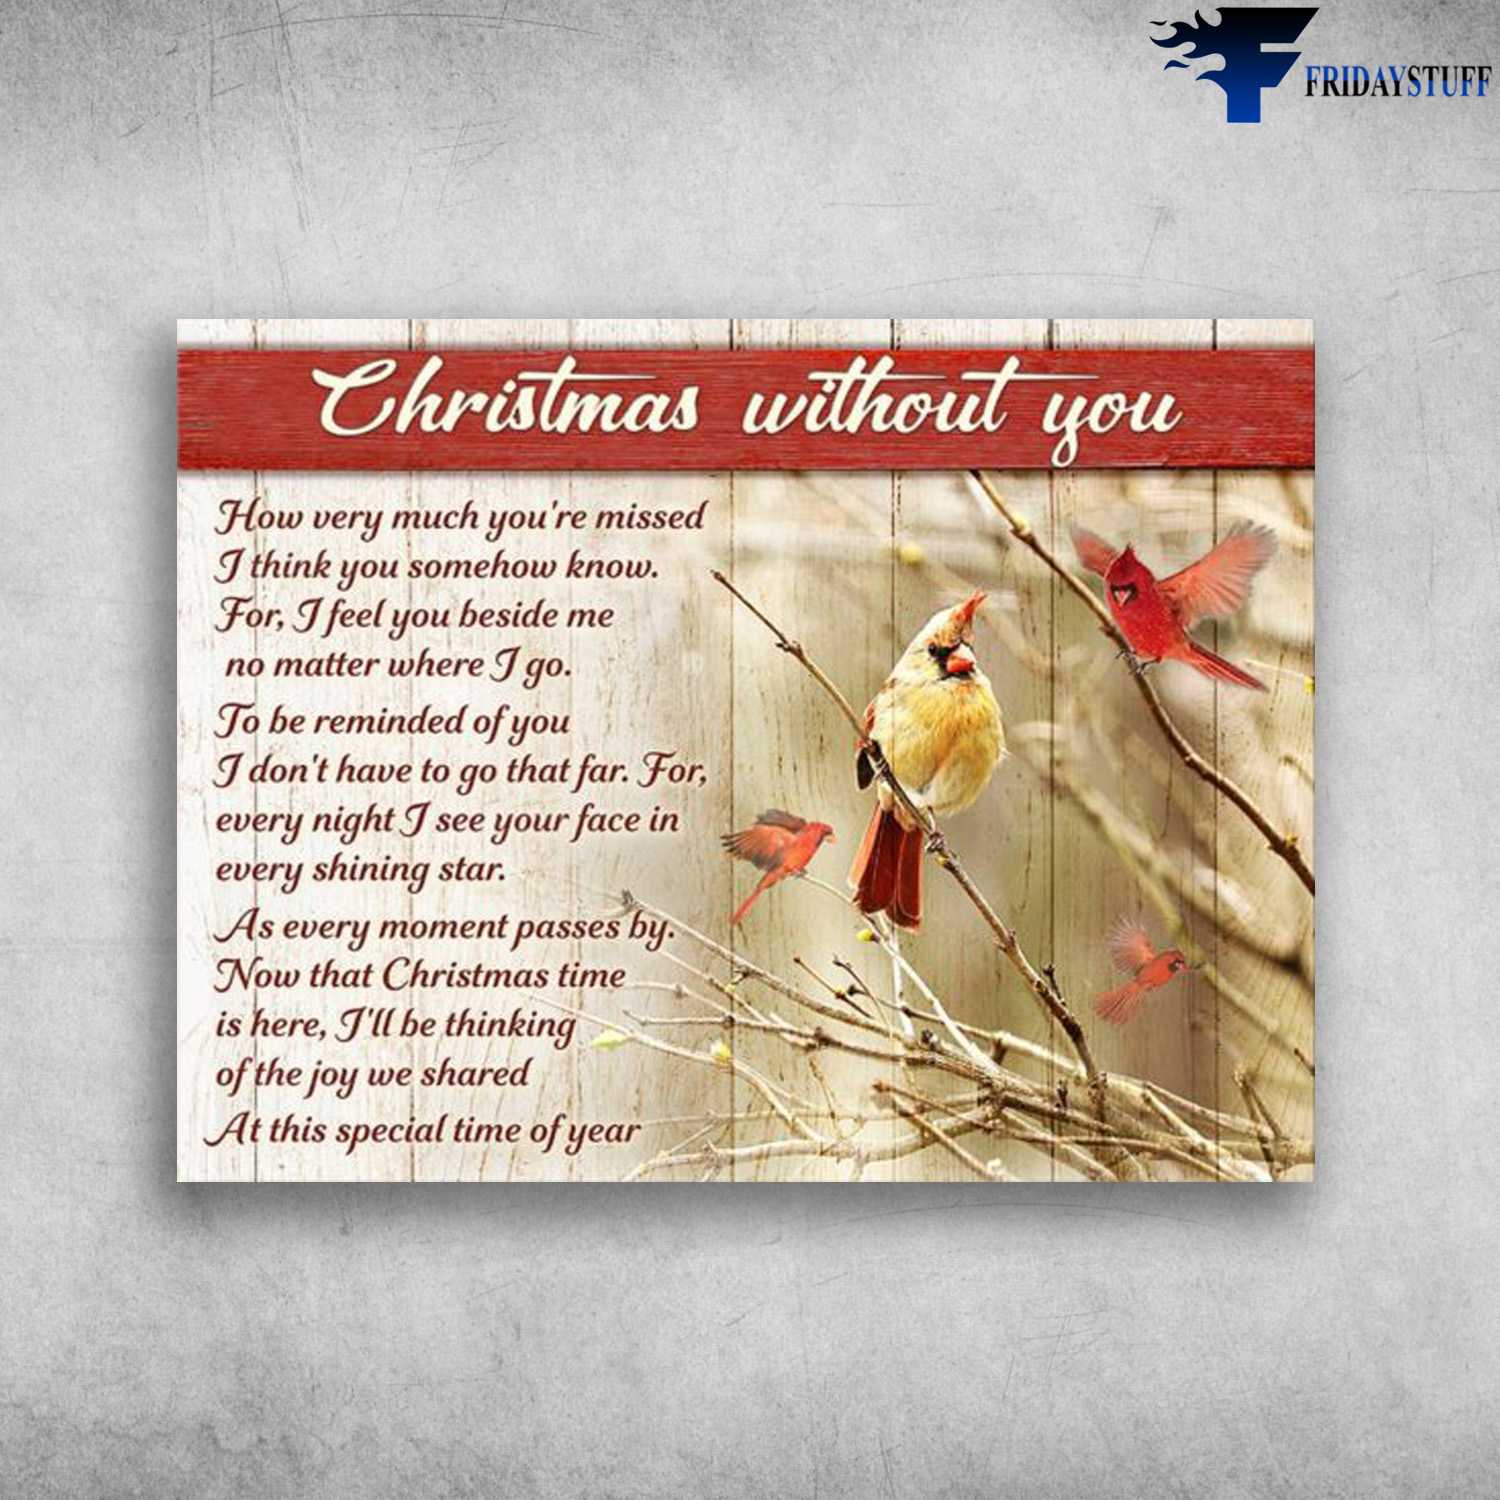 Cardinal Bird, Christmas Without You, How Very Much You're Missed, I Think You Somehow Know, For I Feel You Beside Me, No Matter When I Go, To Be Reminded Of You, I Don't Have To Go That Far